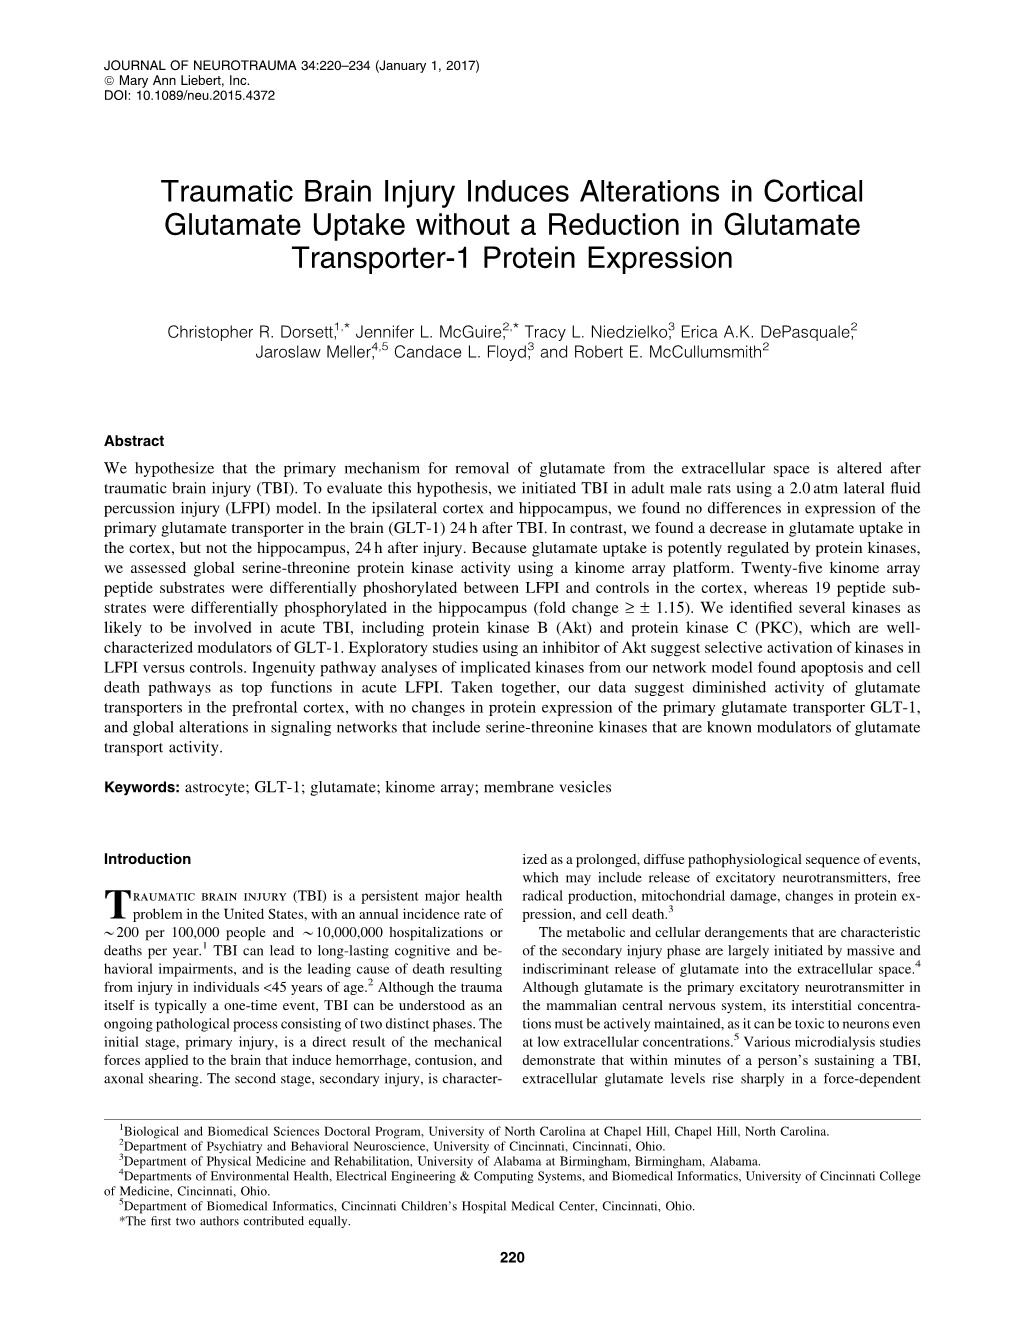 Traumatic Brain Injury Induces Alterations in Cortical Glutamate Uptake Without a Reduction in Glutamate Transporter-1 Protein Expression